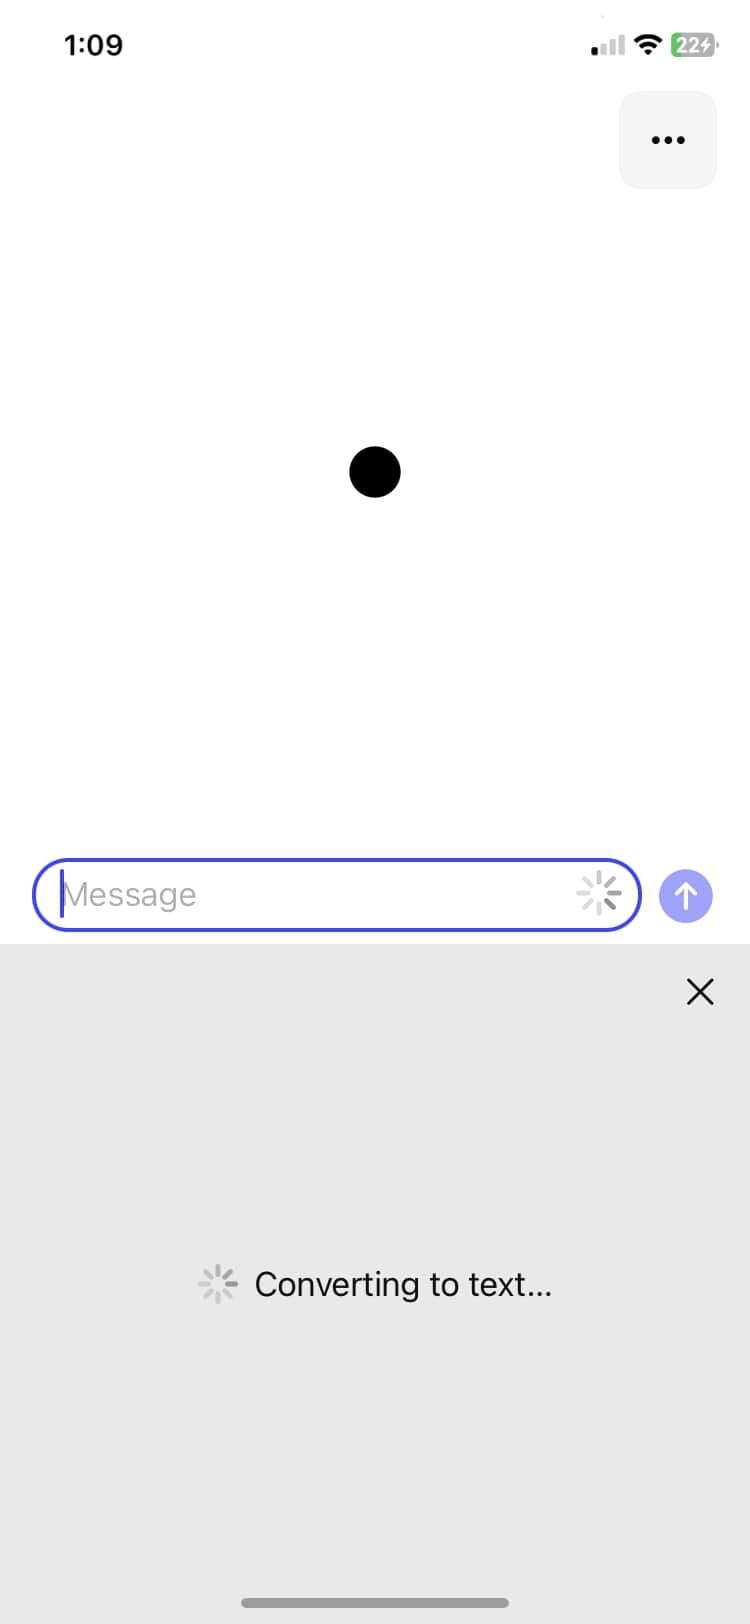 converting to text prompt on iOS app